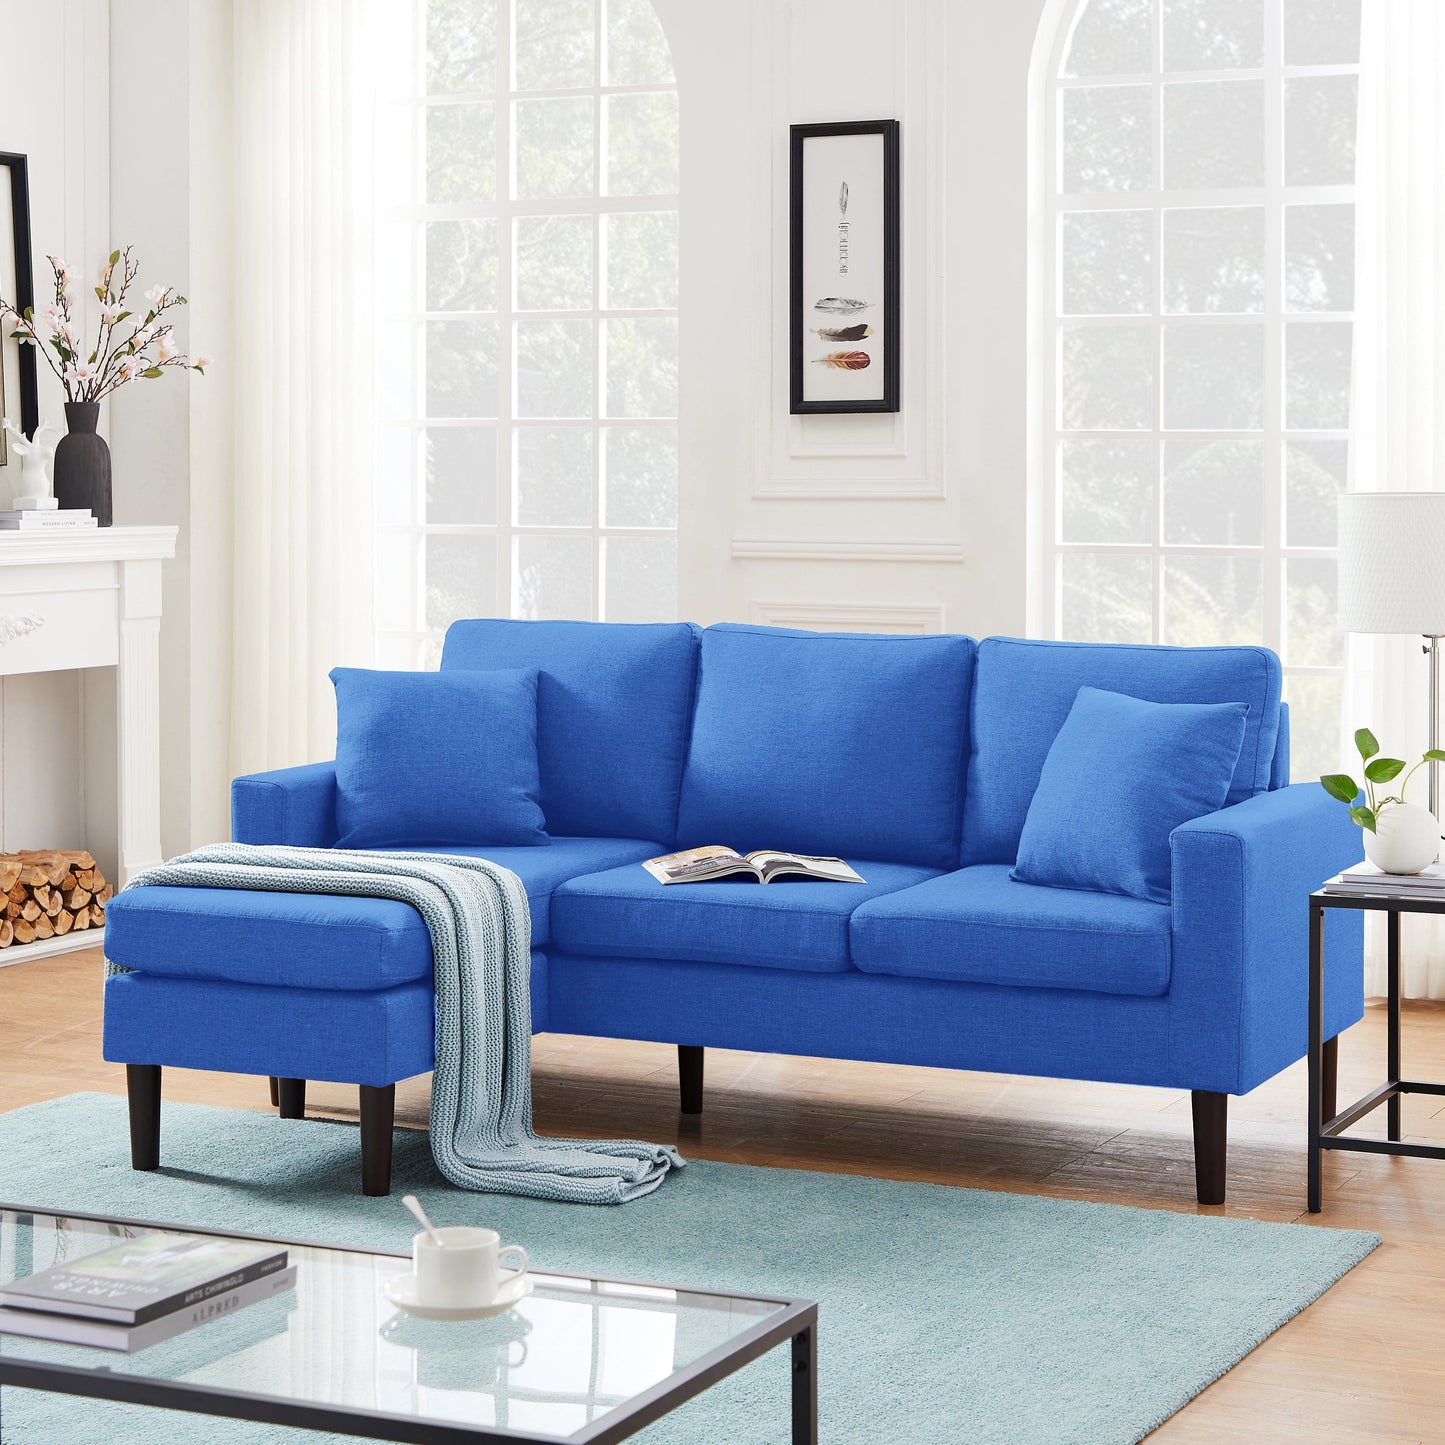 TFC&H Co. 72" SECTIONAL SOFA LEFT HAND FACING W/ 2 PILLOWS - Blue- Ships from The US - sectional at TFC&H Co.